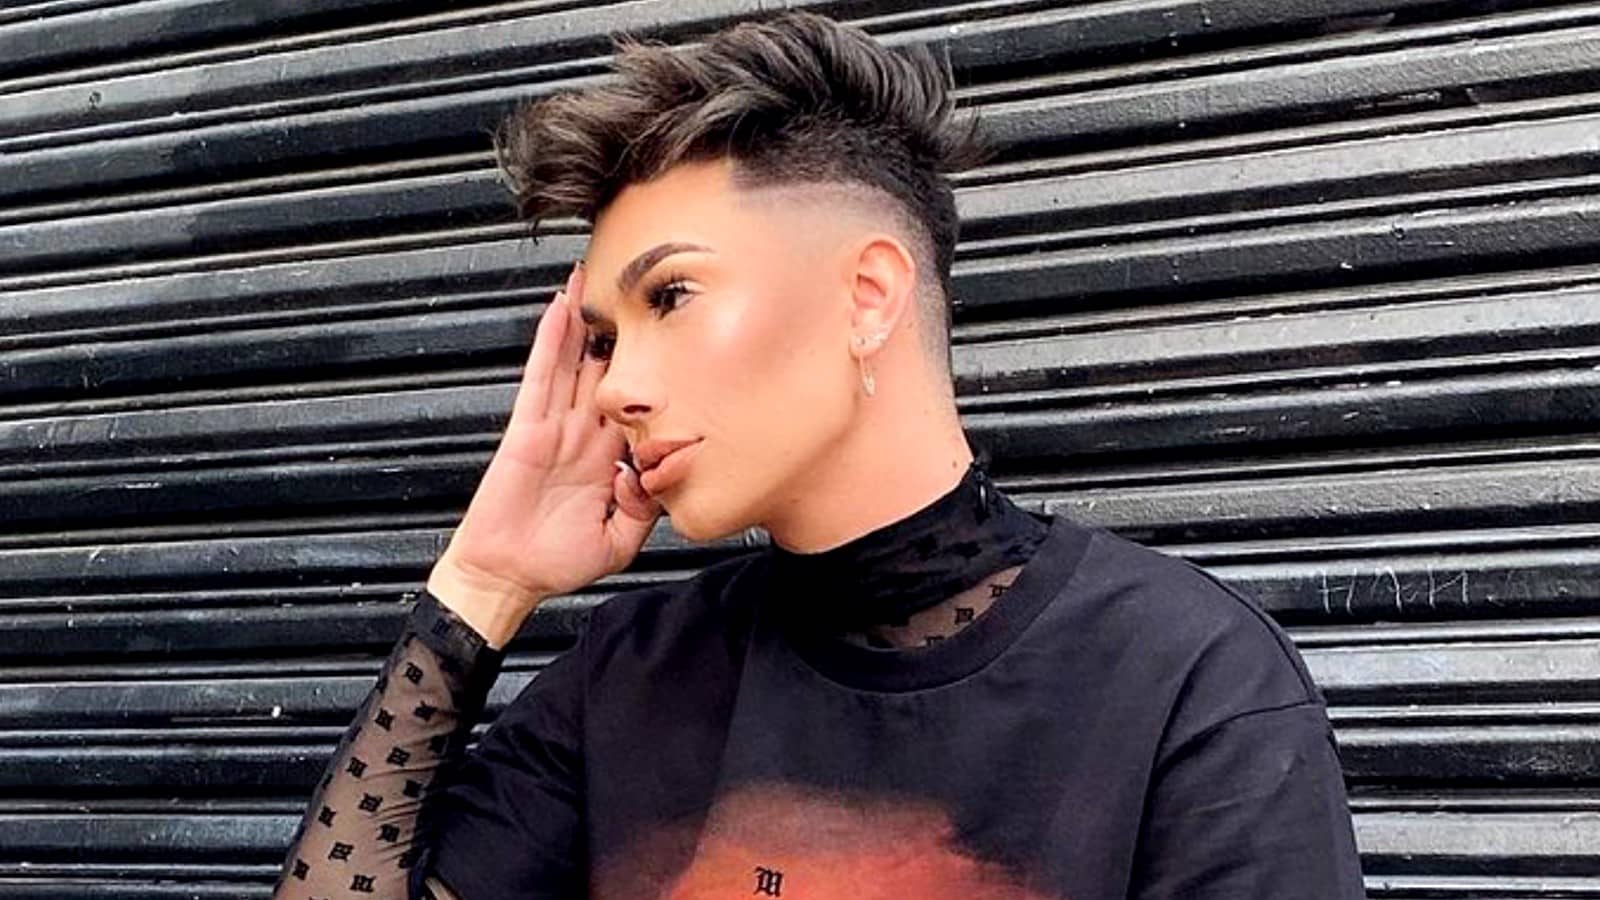 James Charles poses for an Instagram picture